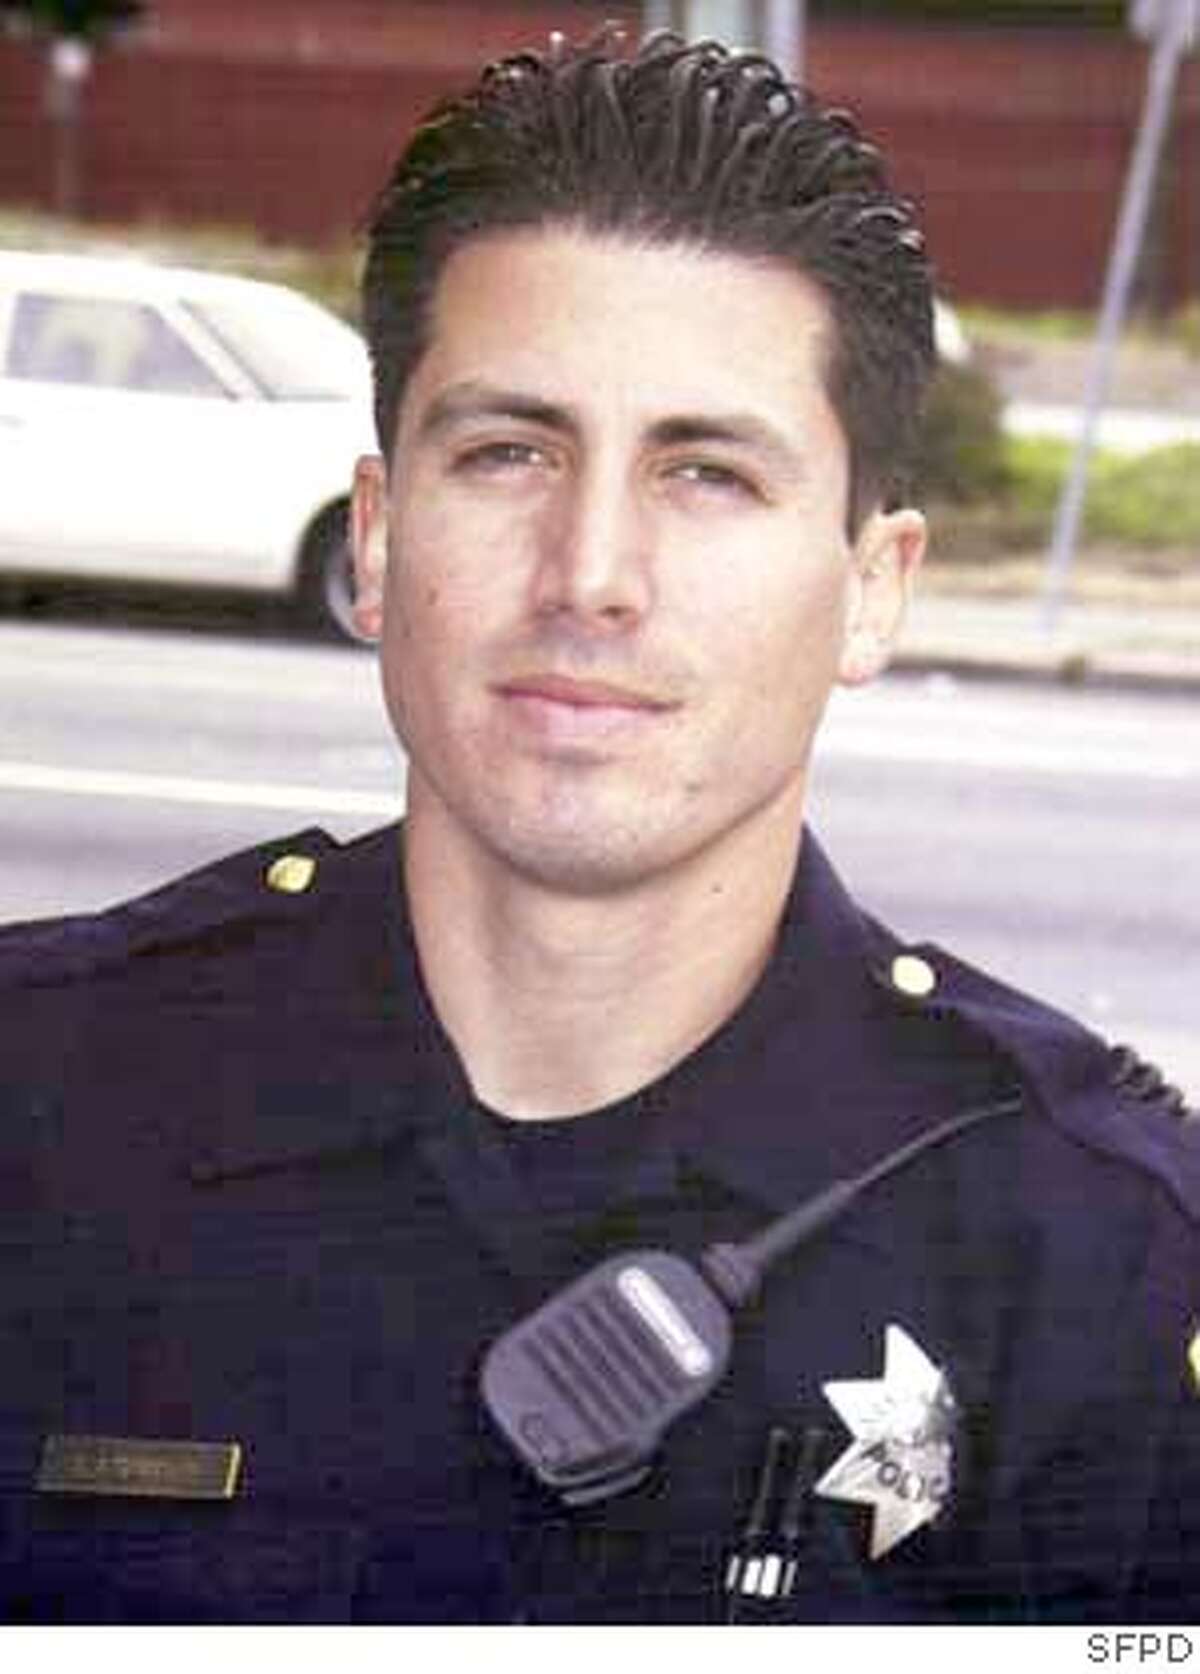 ** FILE **Undated photo of slain San Francisco Police Officer Isaac Espinoza, who was shot Sunday in the Hunterspoint Bayview area of San Francisco. Espinoza, 29, was working undercover in one of the city's most troubled neighborhoods late Saturday when he was shot twice. It was the first killing of an on-duty officer in San Francisco since 1994. (AP Photo/San Francisco Police Dept via The San Francisco Chronicle) Officer Isaac Espinoza was working undercover when he was shot twice and killed. Officer Isaac Espinoza was working undercover in the Bayview district when he was shot and killed. ProductNameChronicle UNDATED PHOTO; SAN FRANCISCO POLICE DEPT VIA THE SAN FRANCISCO CHRONICLE